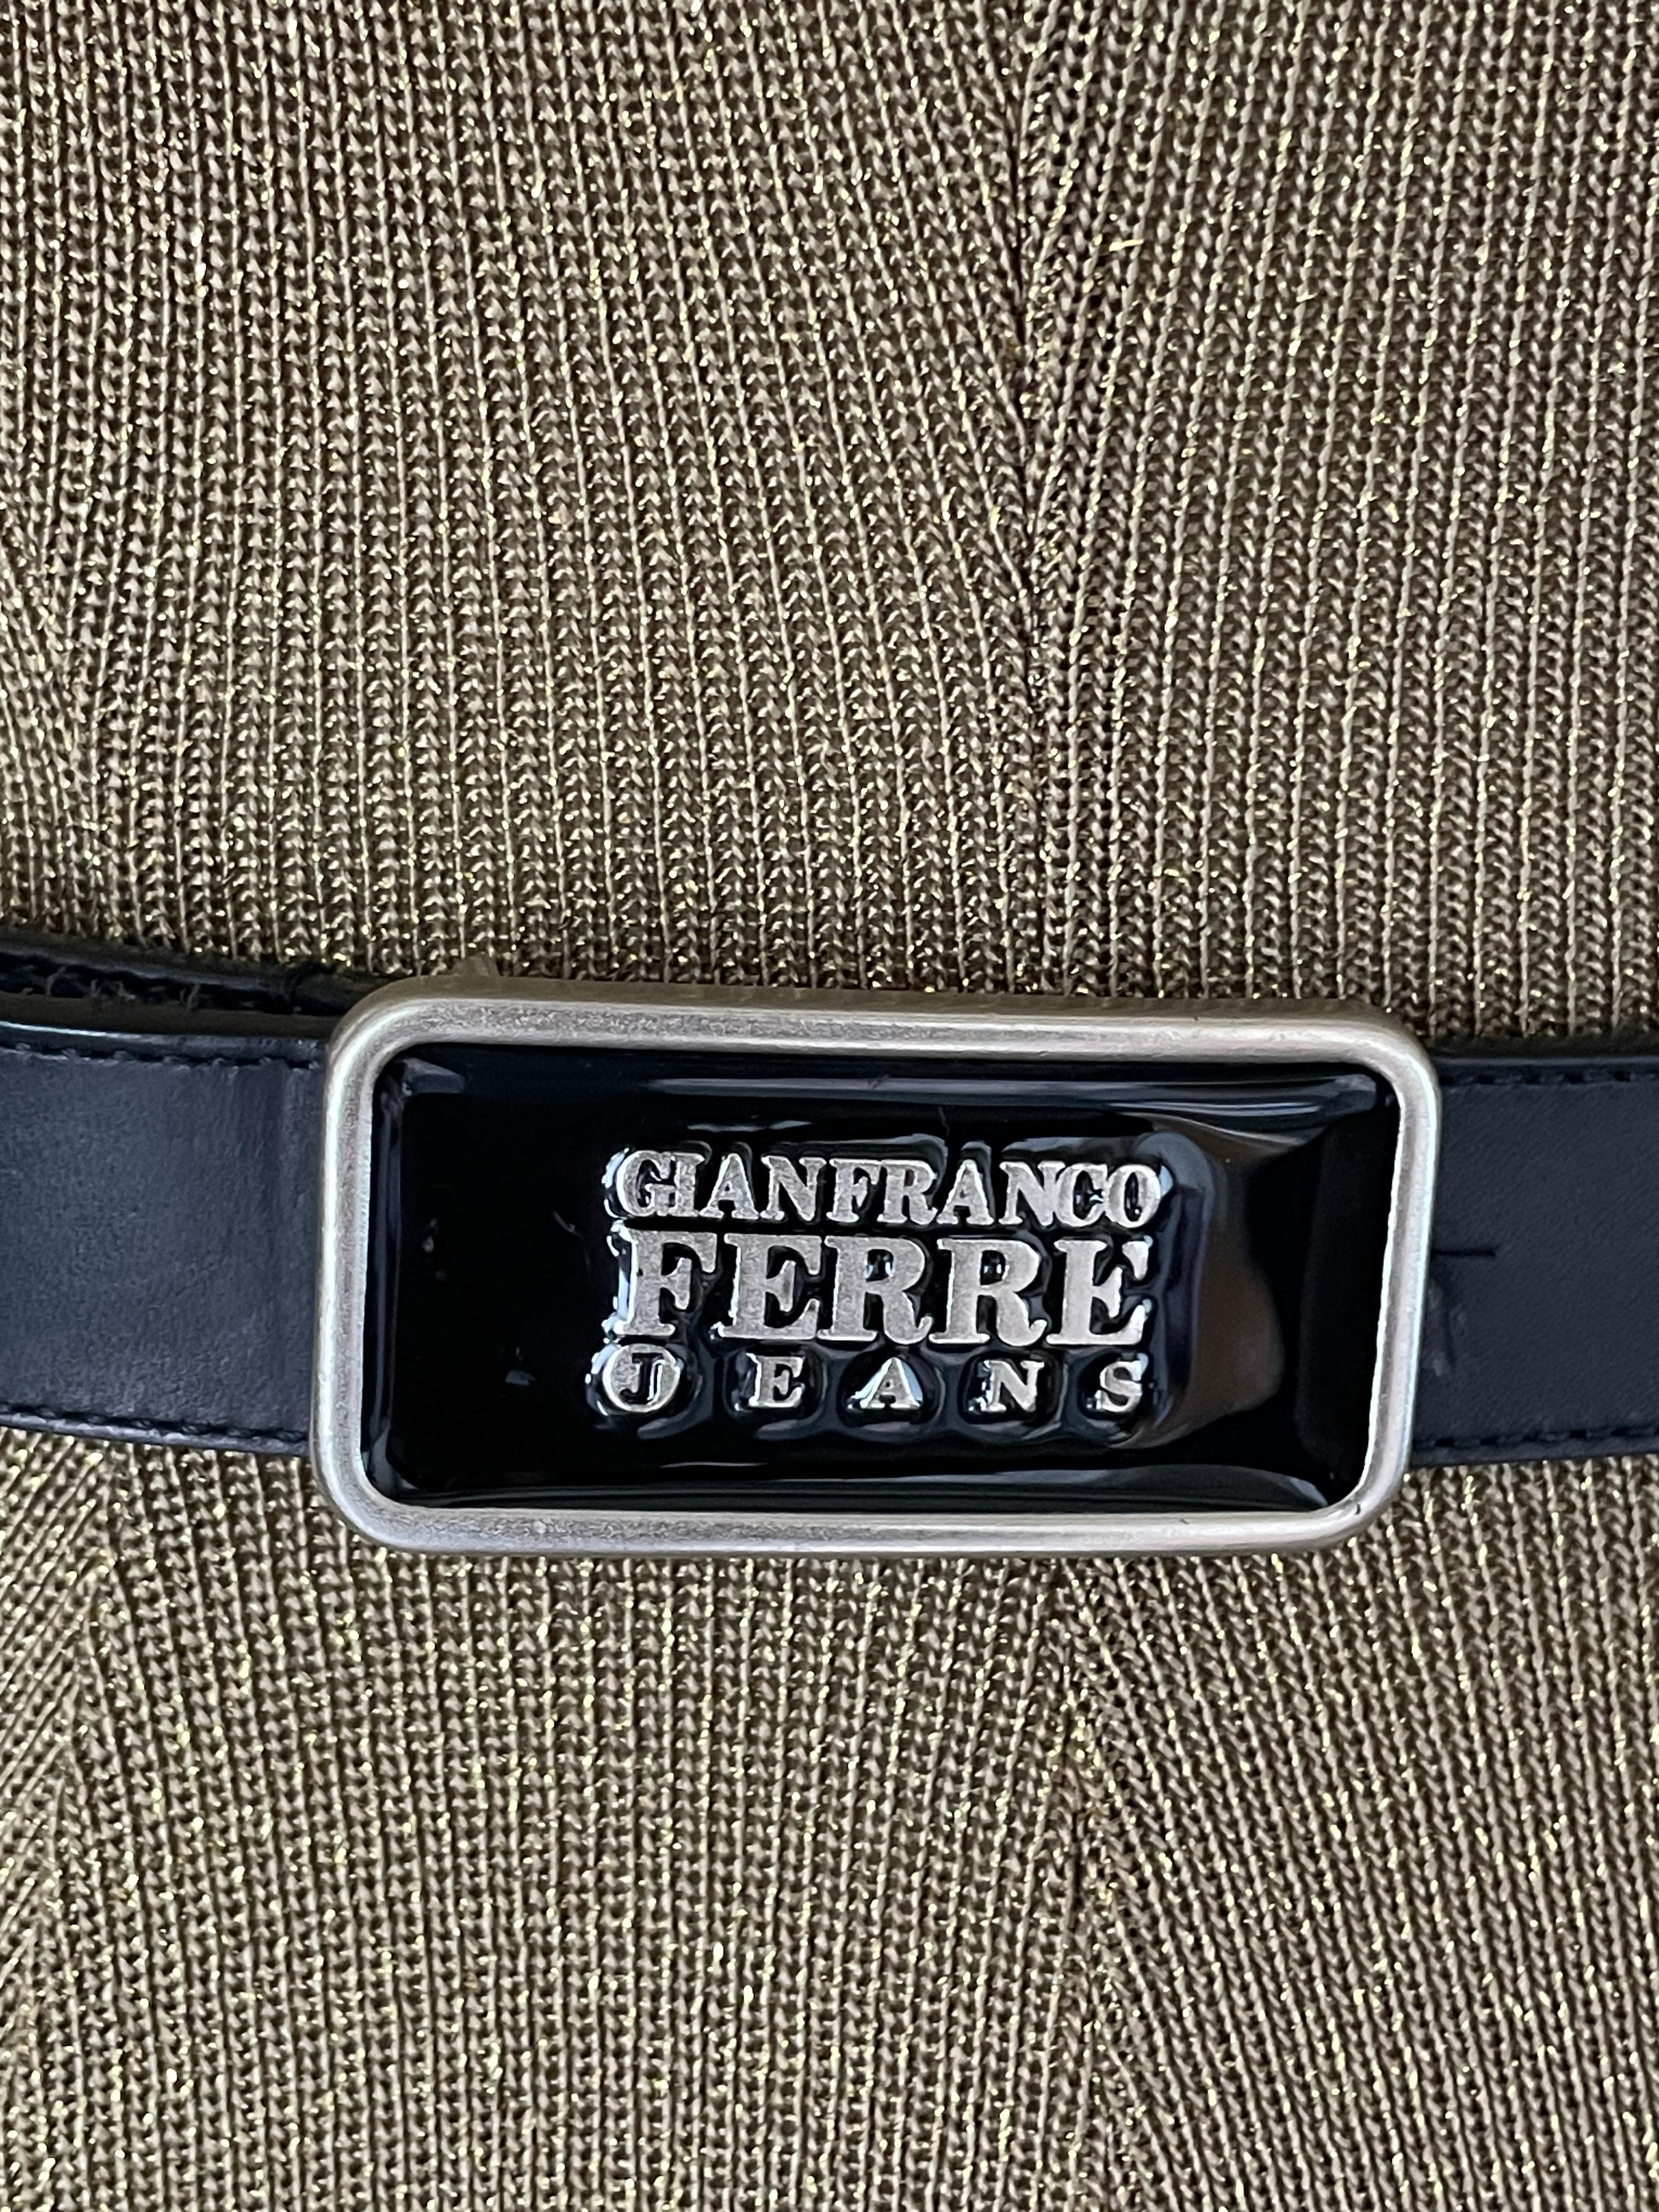 Rare Gianfranco Ferre Belt.

Gianfranco Ferré was an Italian fashion designer known for his elegant and sophisticated designs. He was often referred to as the 